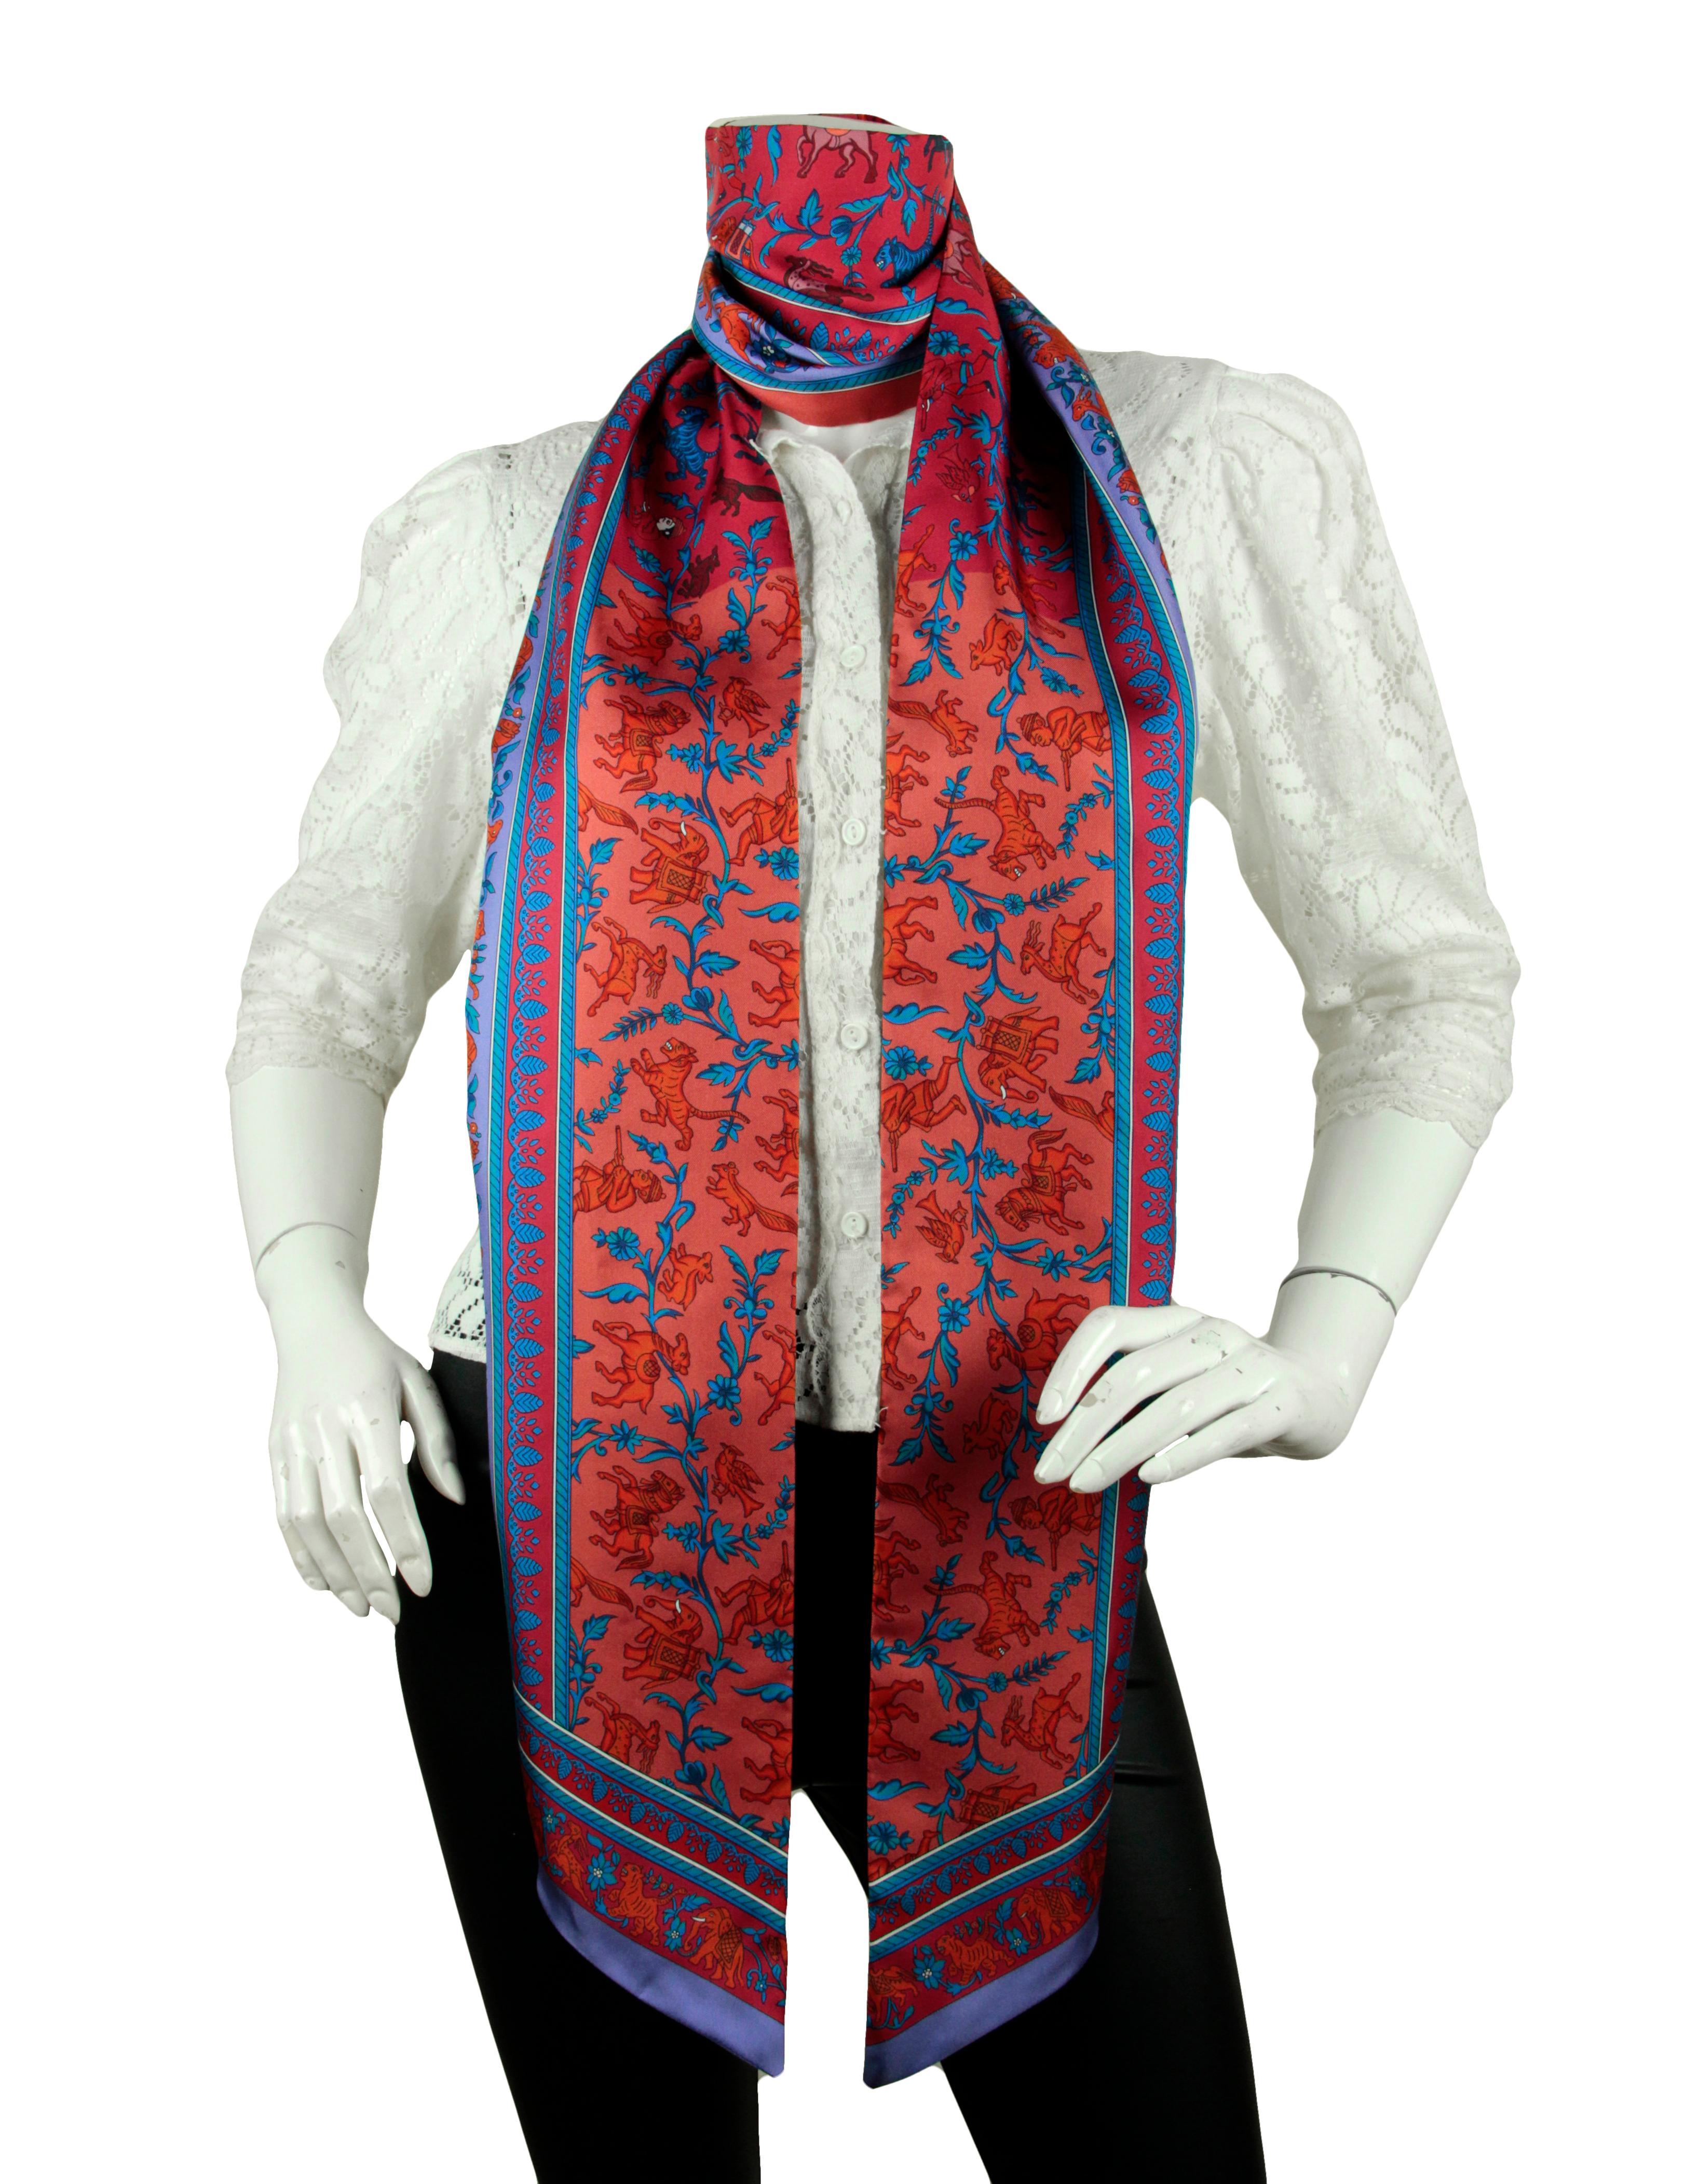 Hermes Red/ Blue Chasse en Inde (Hunt in India) Silk Maxi Twilly Scarf 2